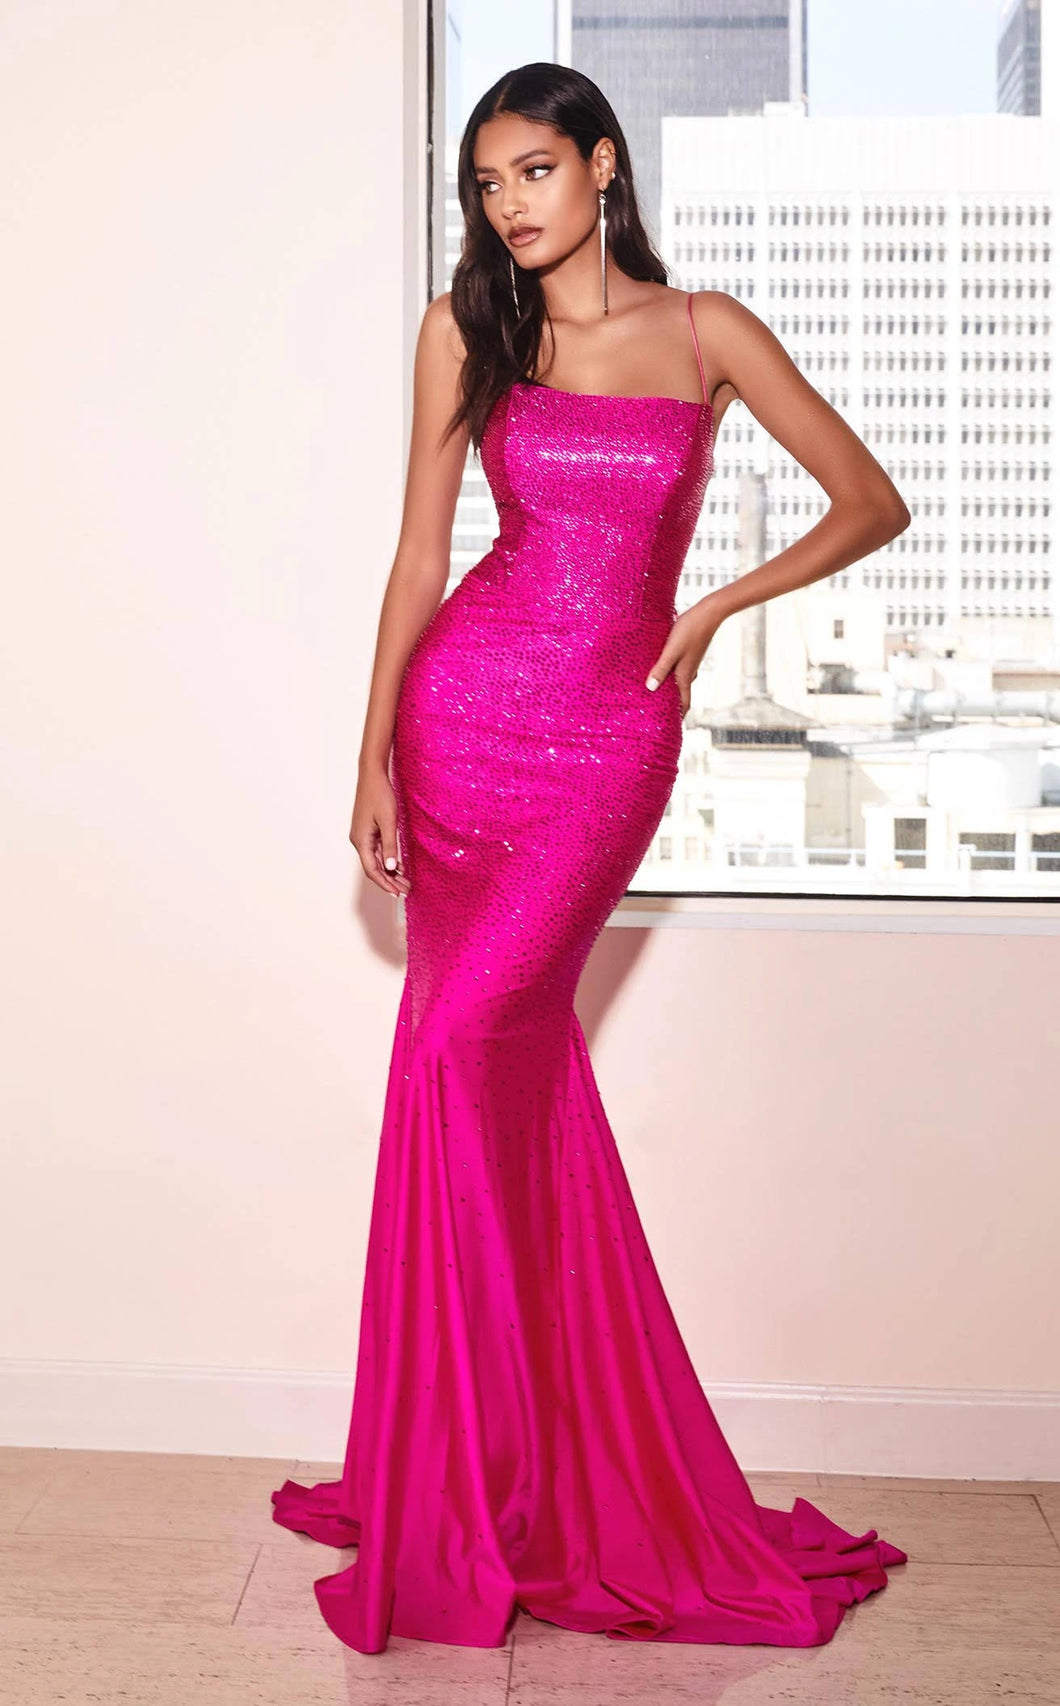 CD0179 Ladivine Rhinestone fitted gown